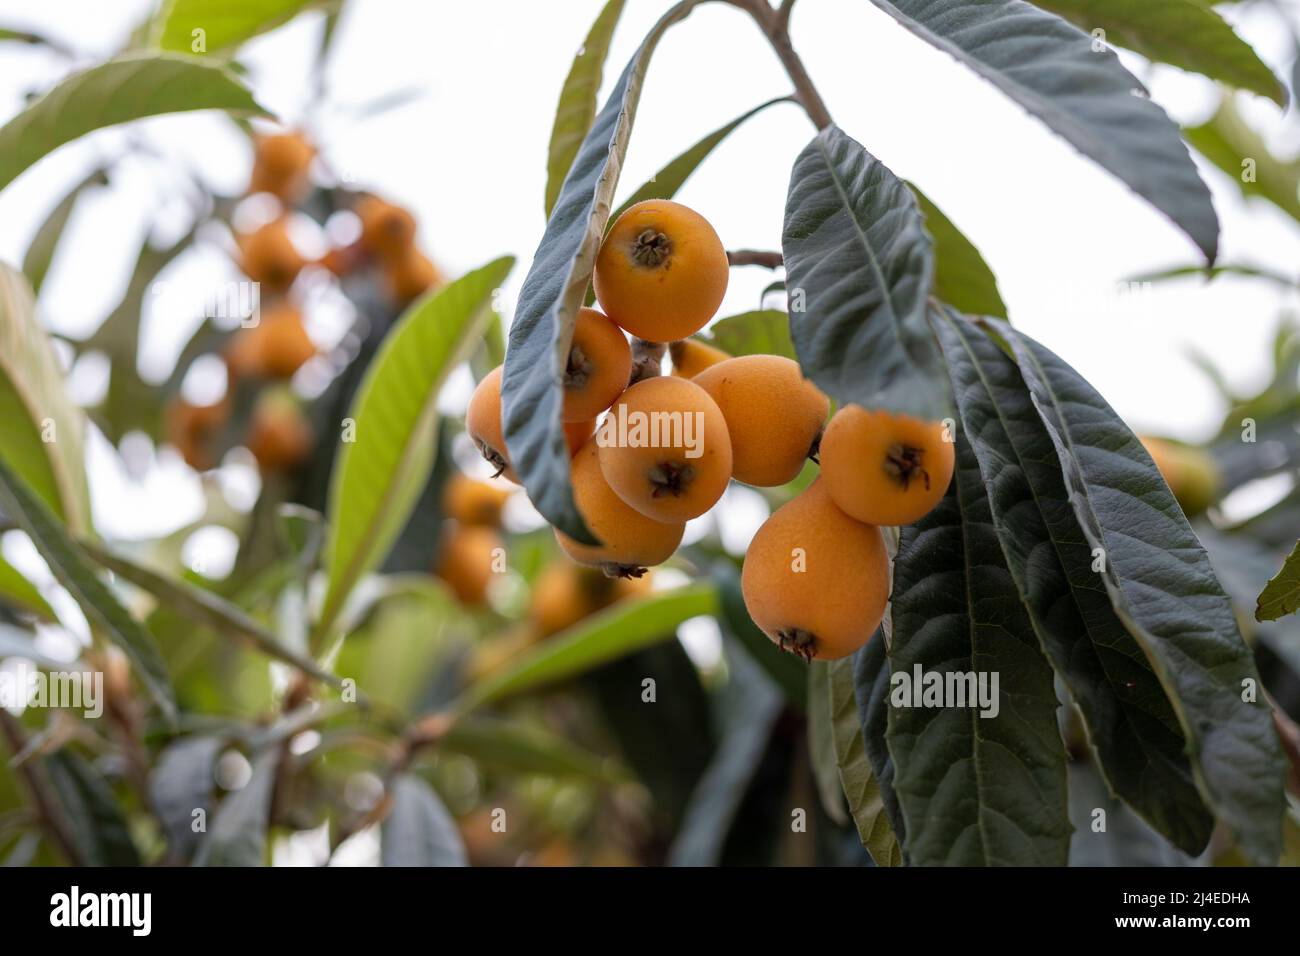 Loquat fruit and leaves in a tree Stock Photo